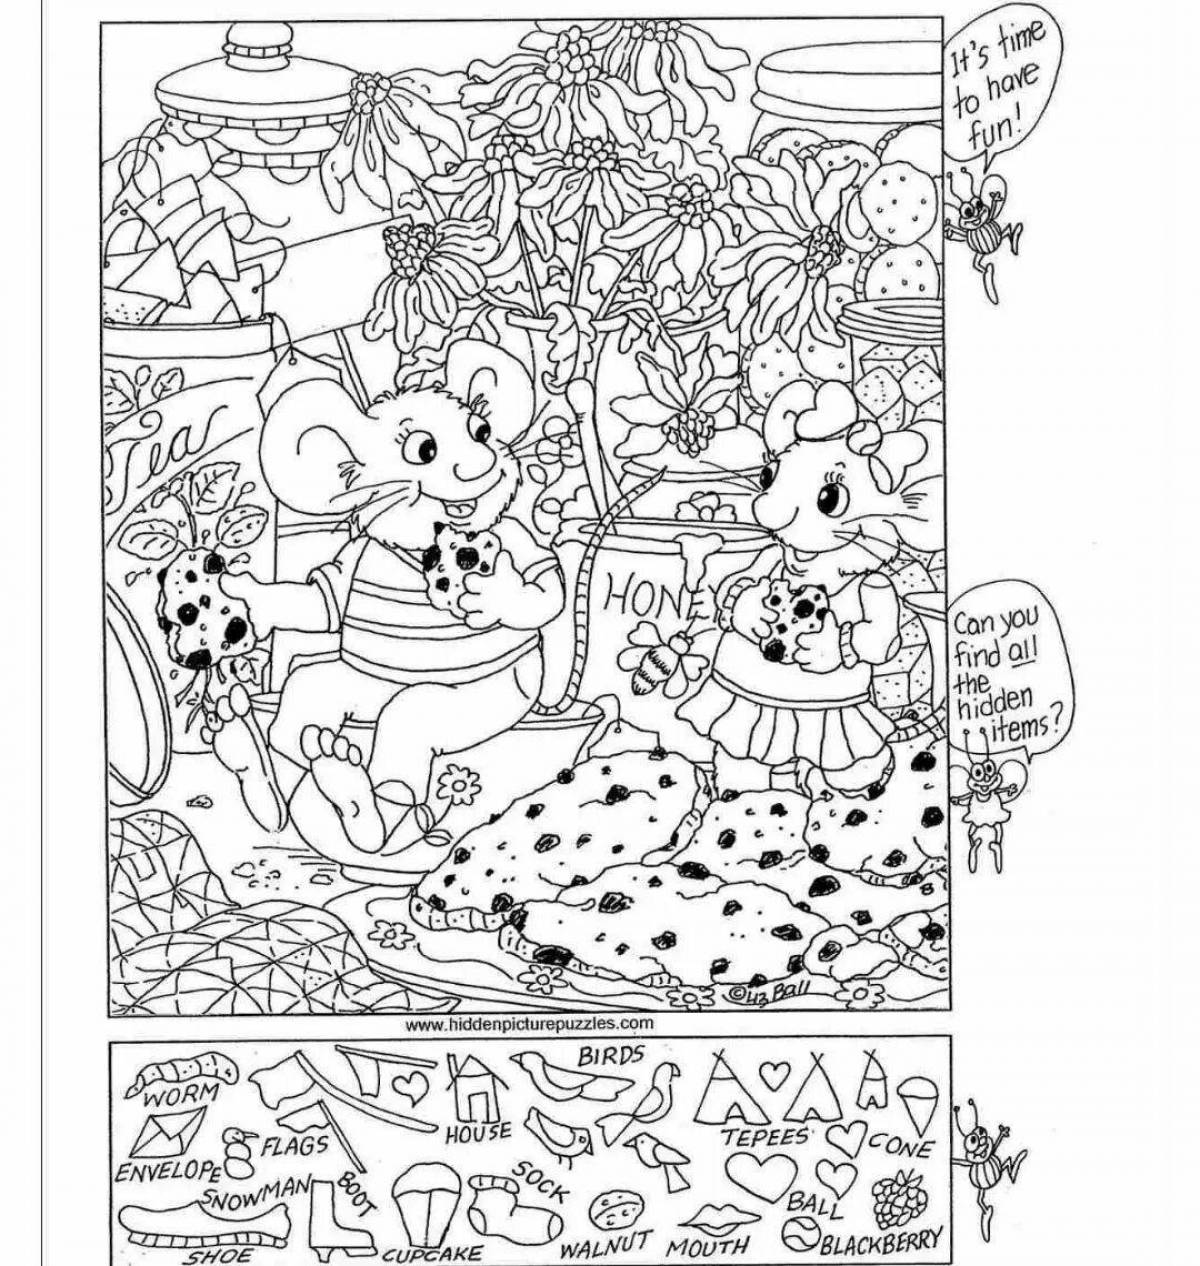 Fun coloring how to find